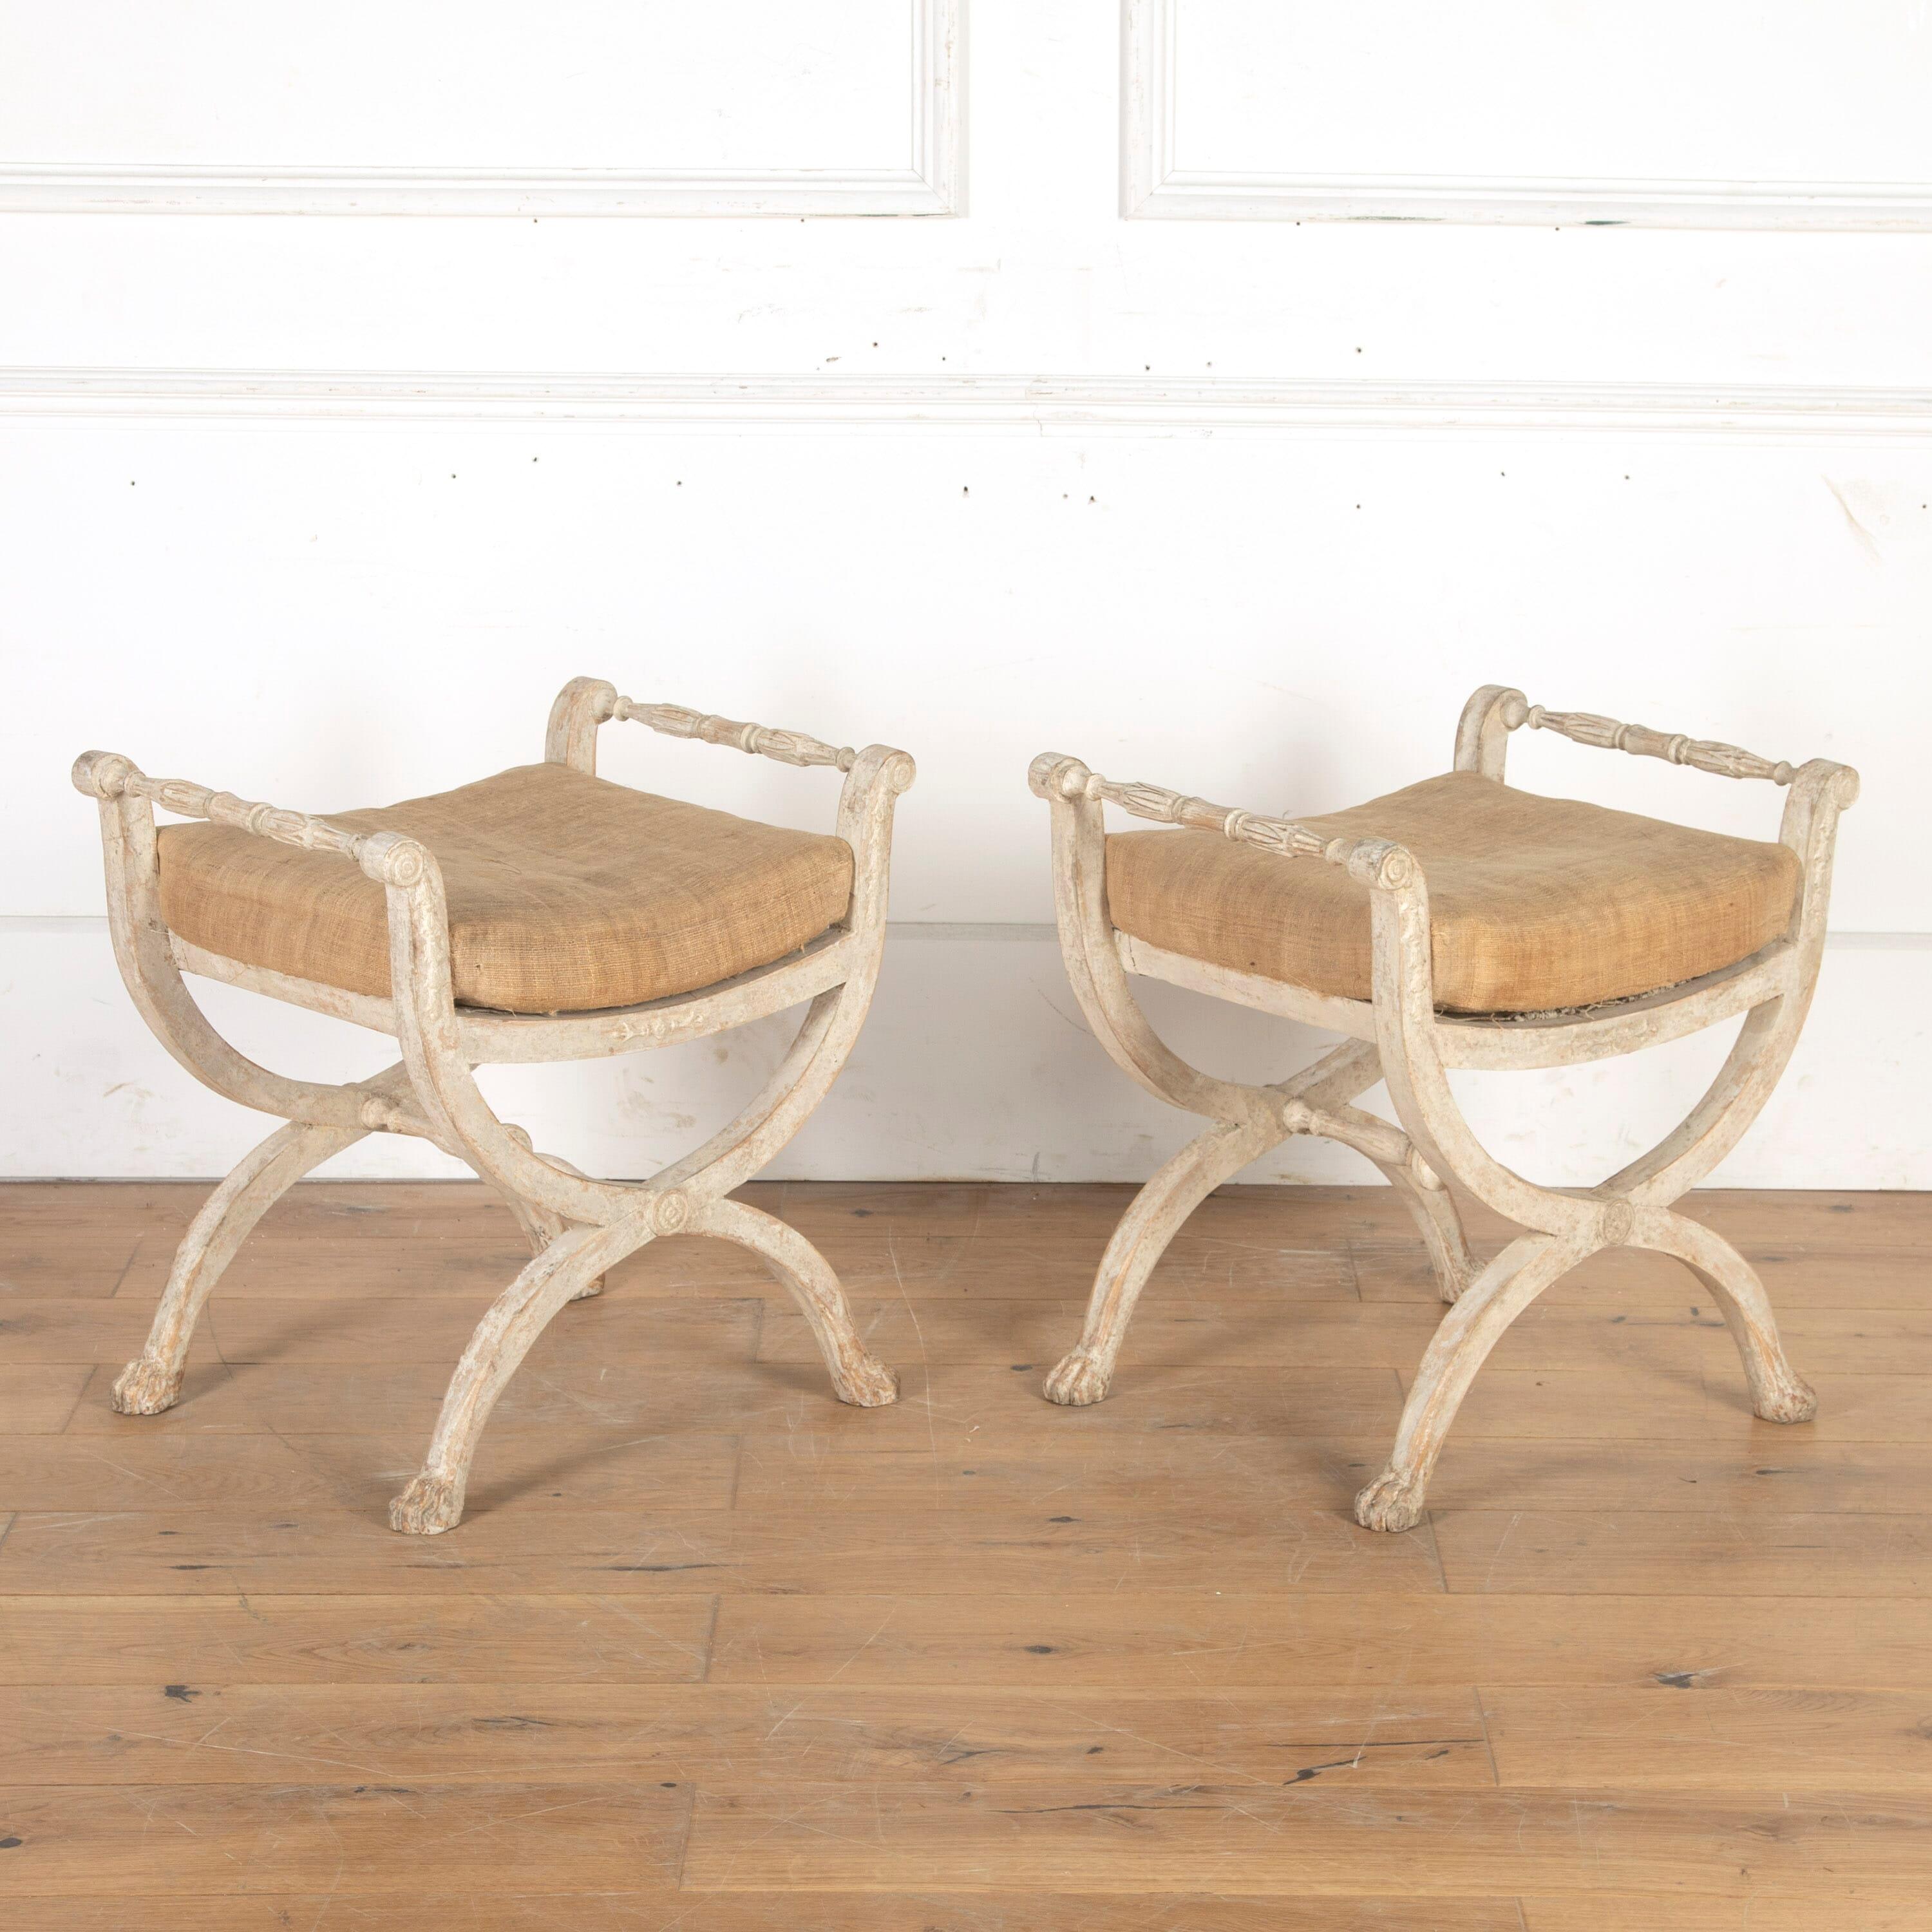 Pair of early 19th century Swedish Stockholm-made stools.

The seats are supported within an elegant yet substantial cross-form frame that terminates in carved lion's paw feet. 

Featuring decorative carving to the gently outscrolled armrests.